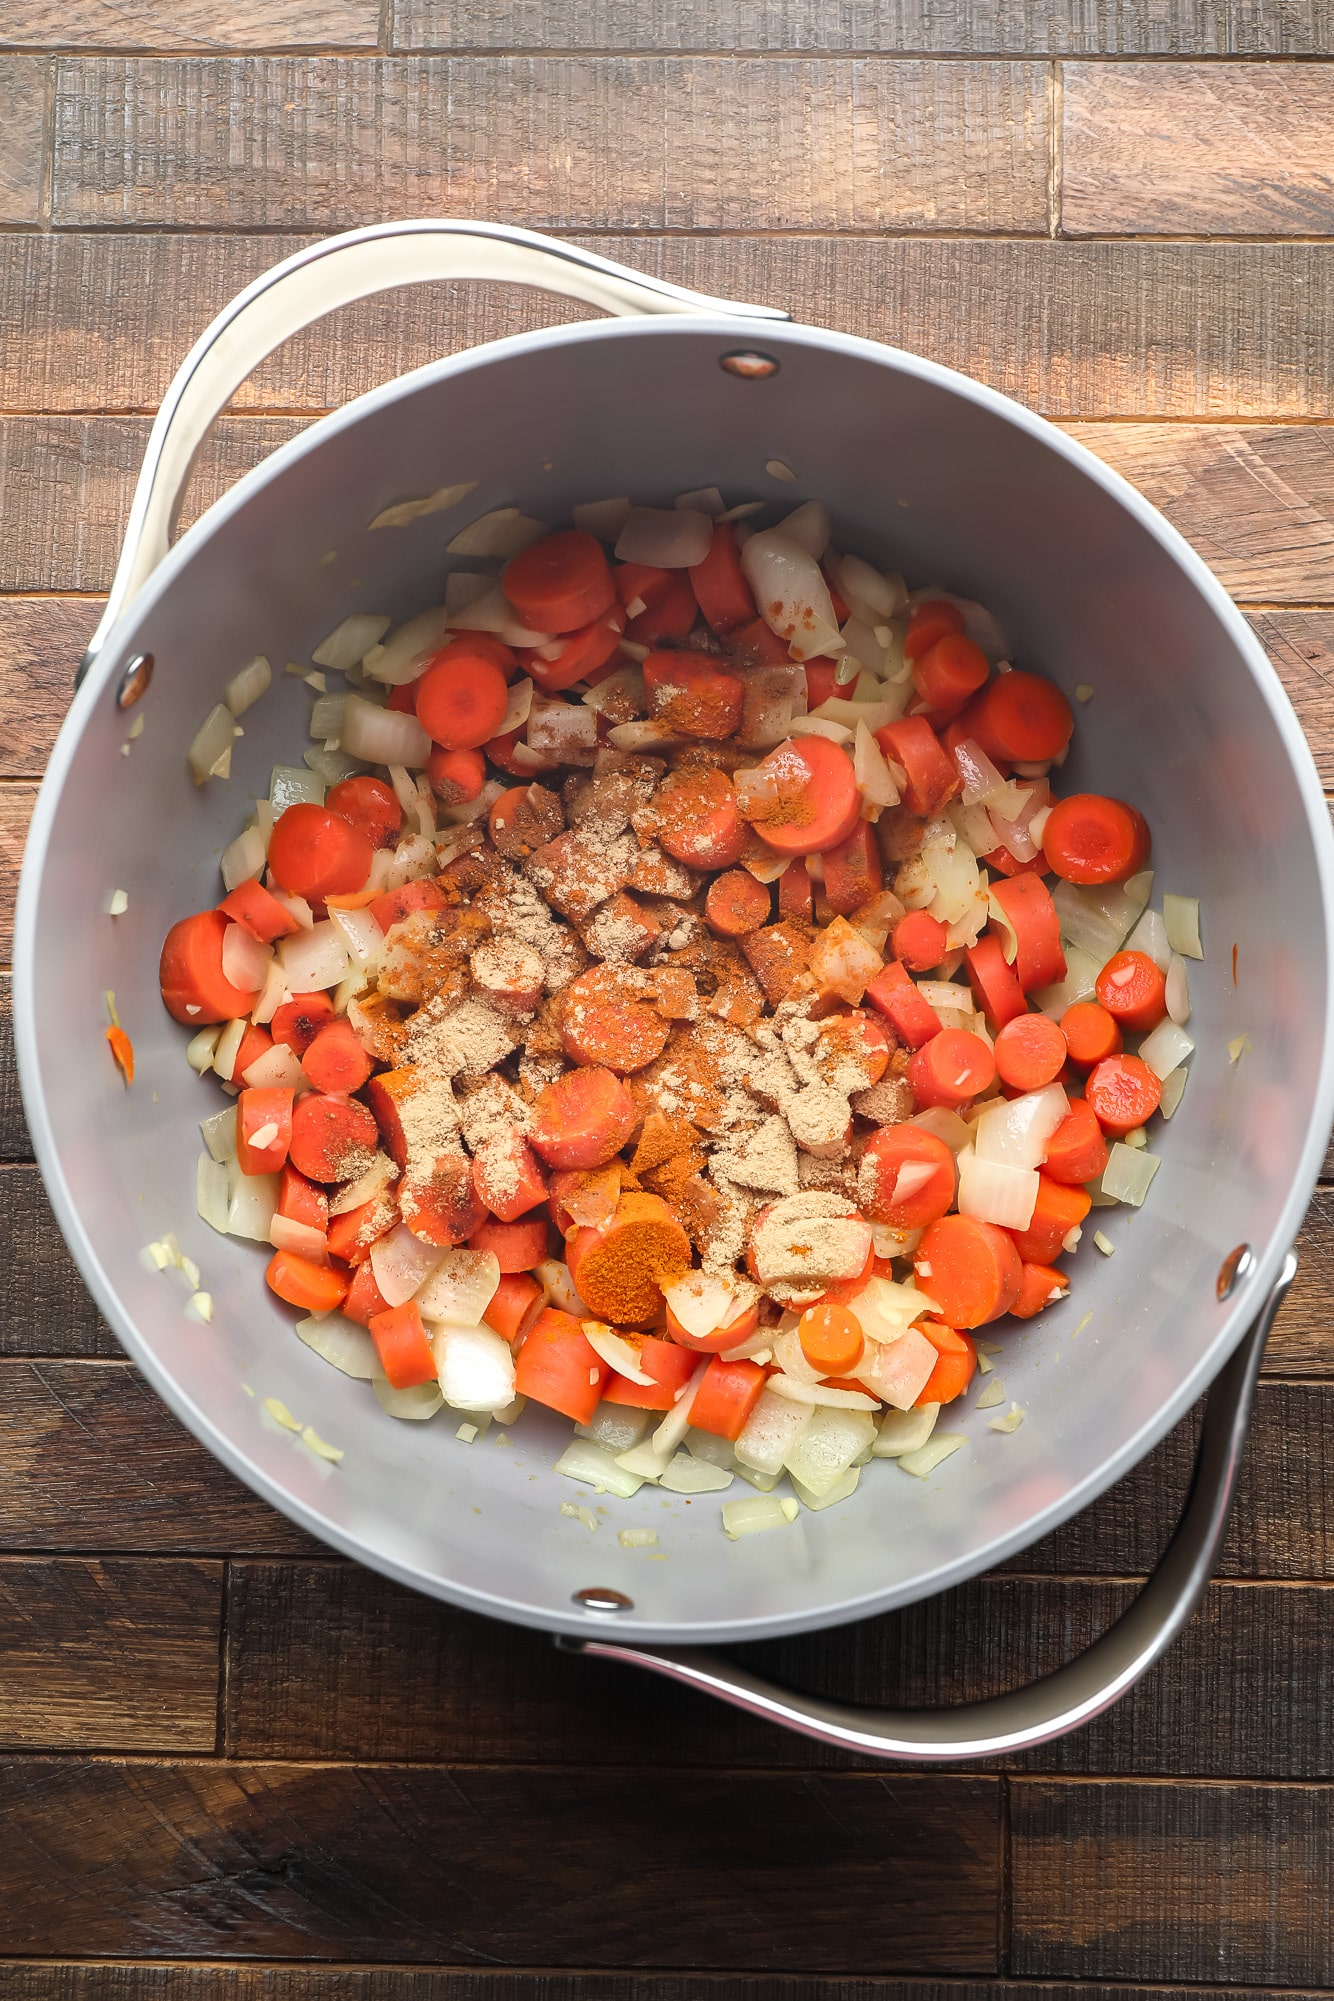 chopped carrots, onions, and garlic coated in spices in a large grey pot.